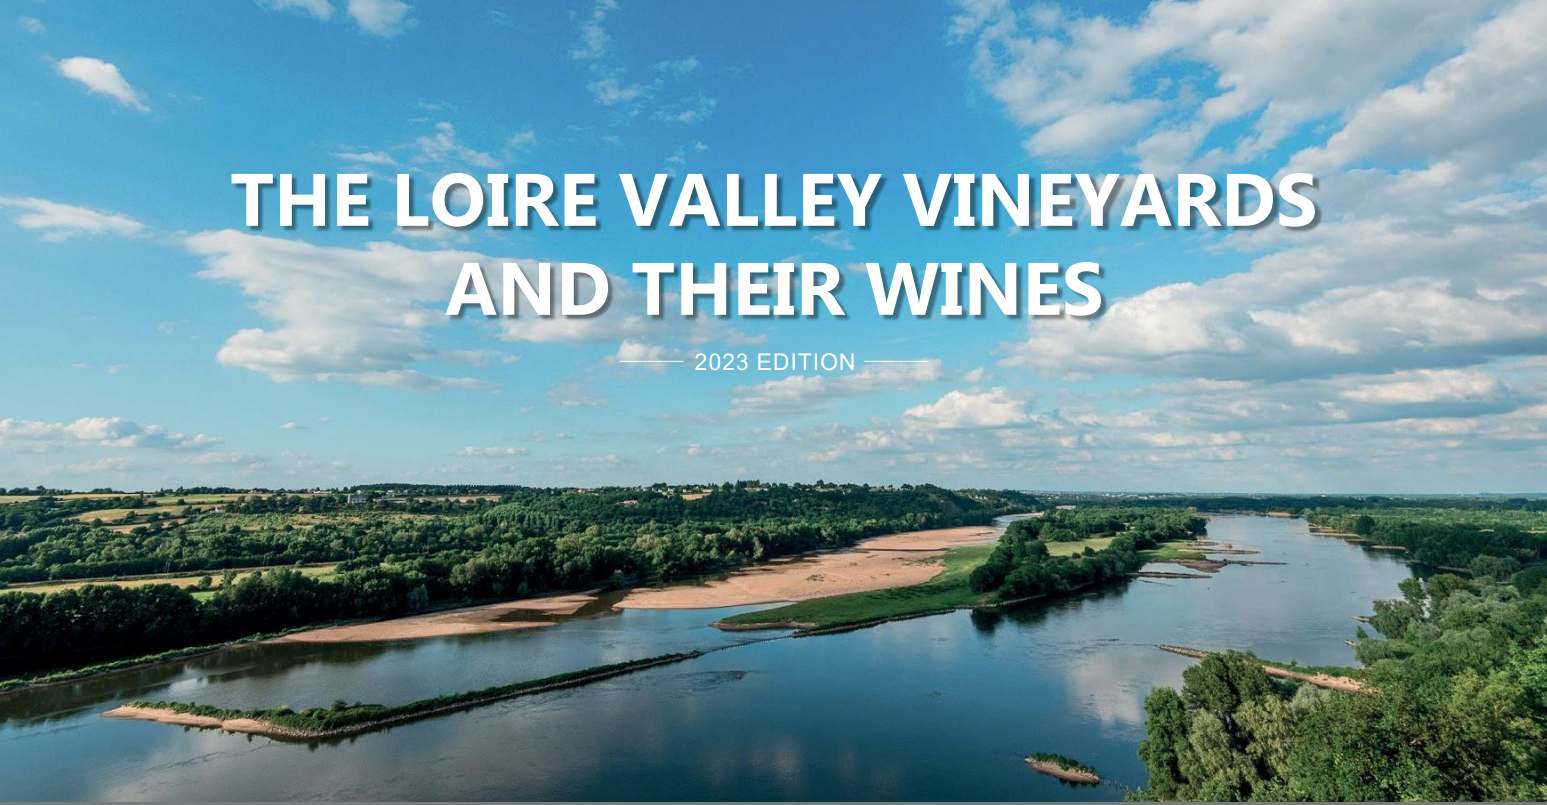 The loire valley vineyards